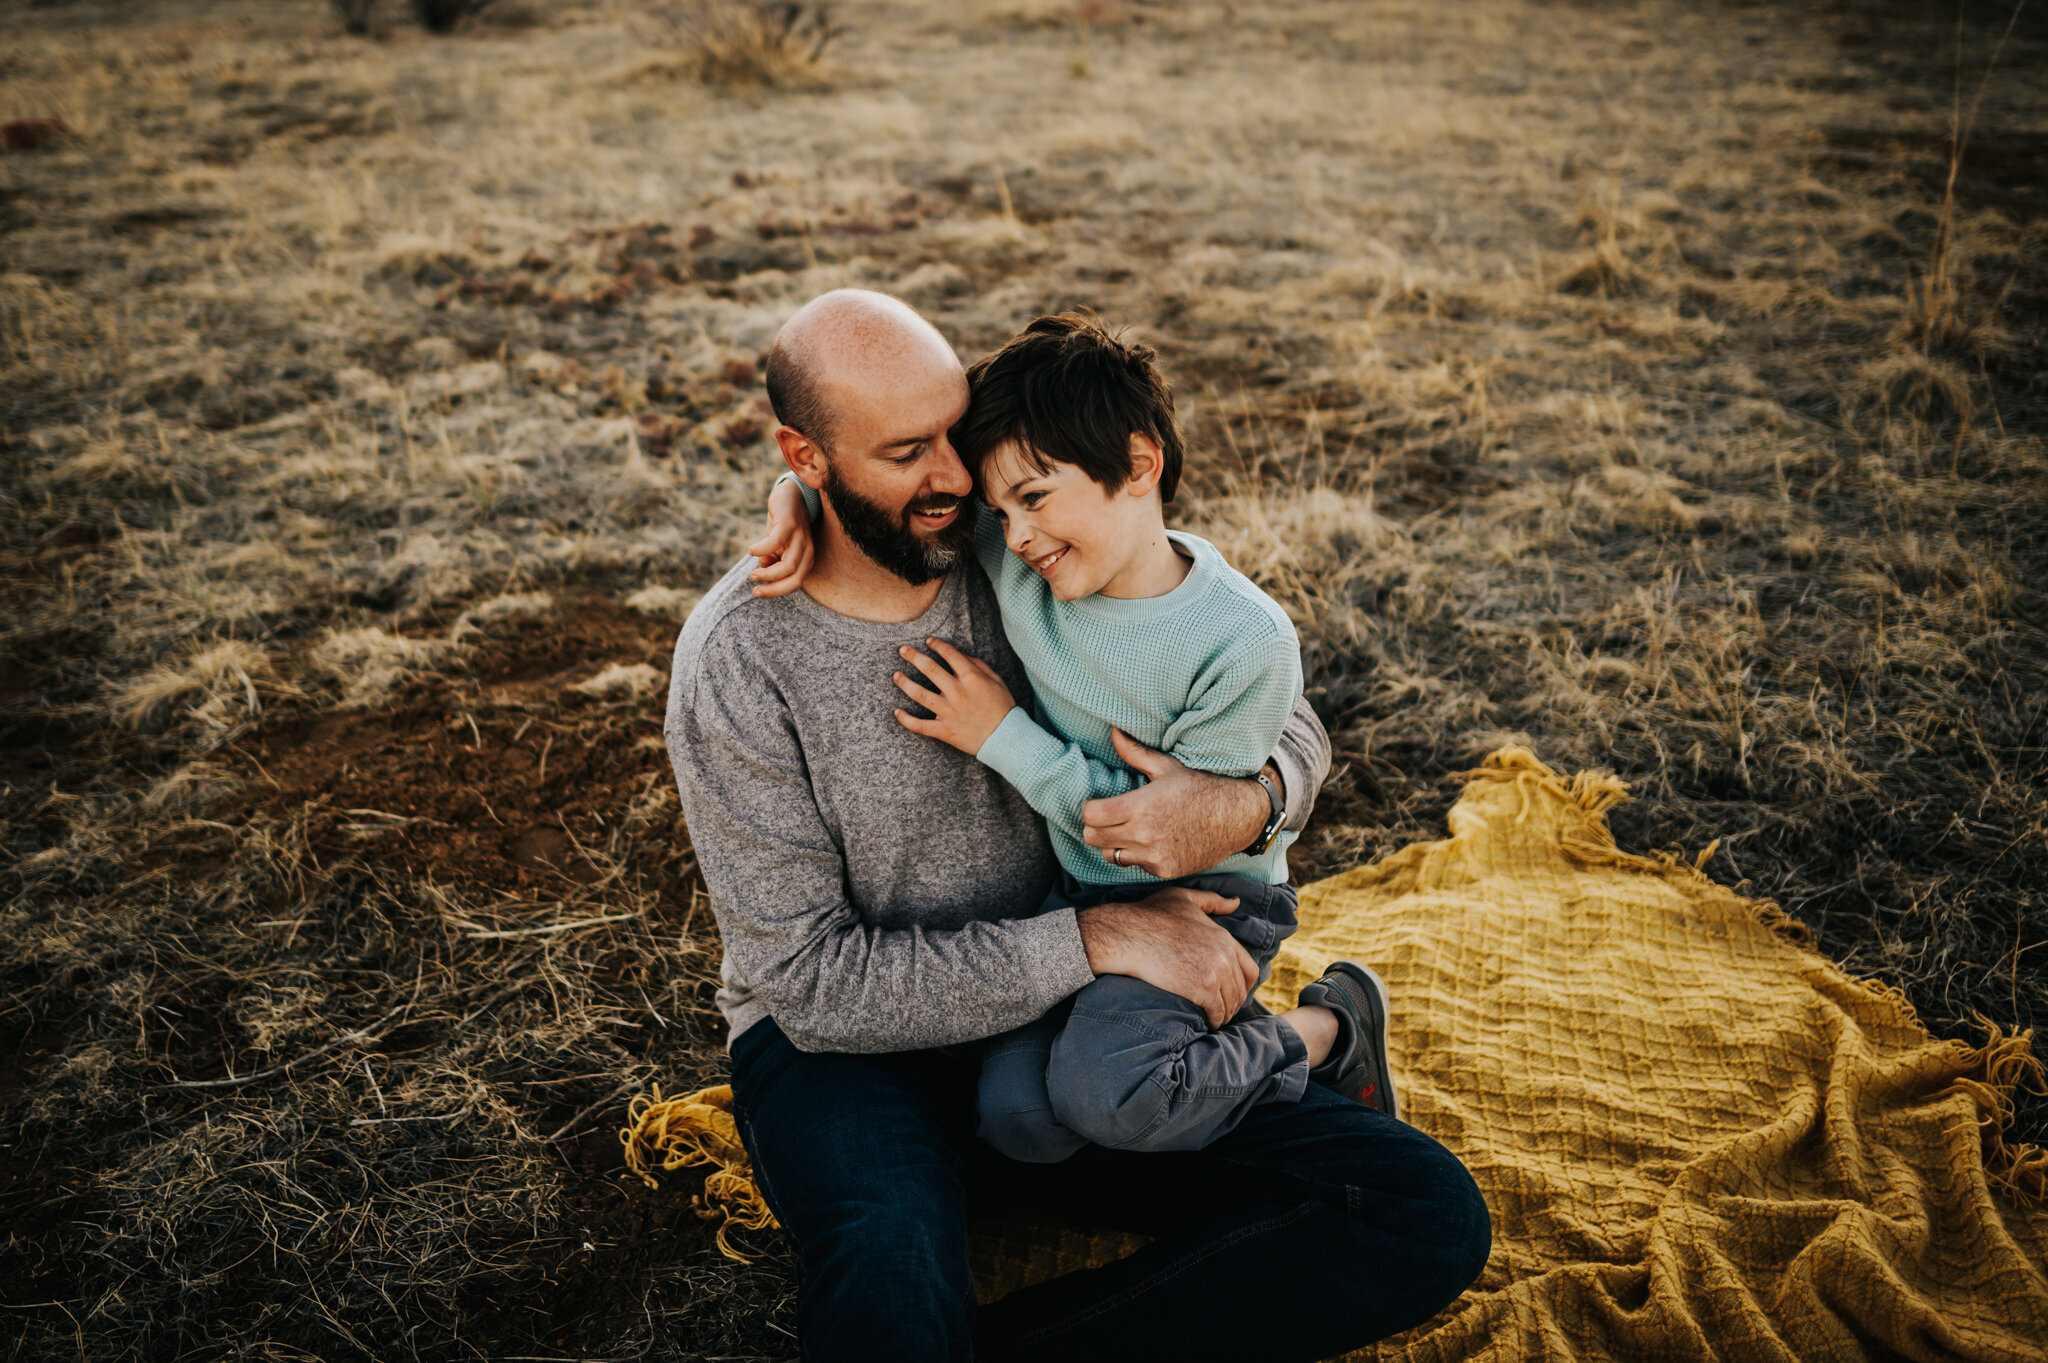 Lisa Liberati Family Session Colorado Springs Photographer Sunset Cheyenne Canyon Mother Father Son Daughter Wild Prairie Photography-26-2020.jpg